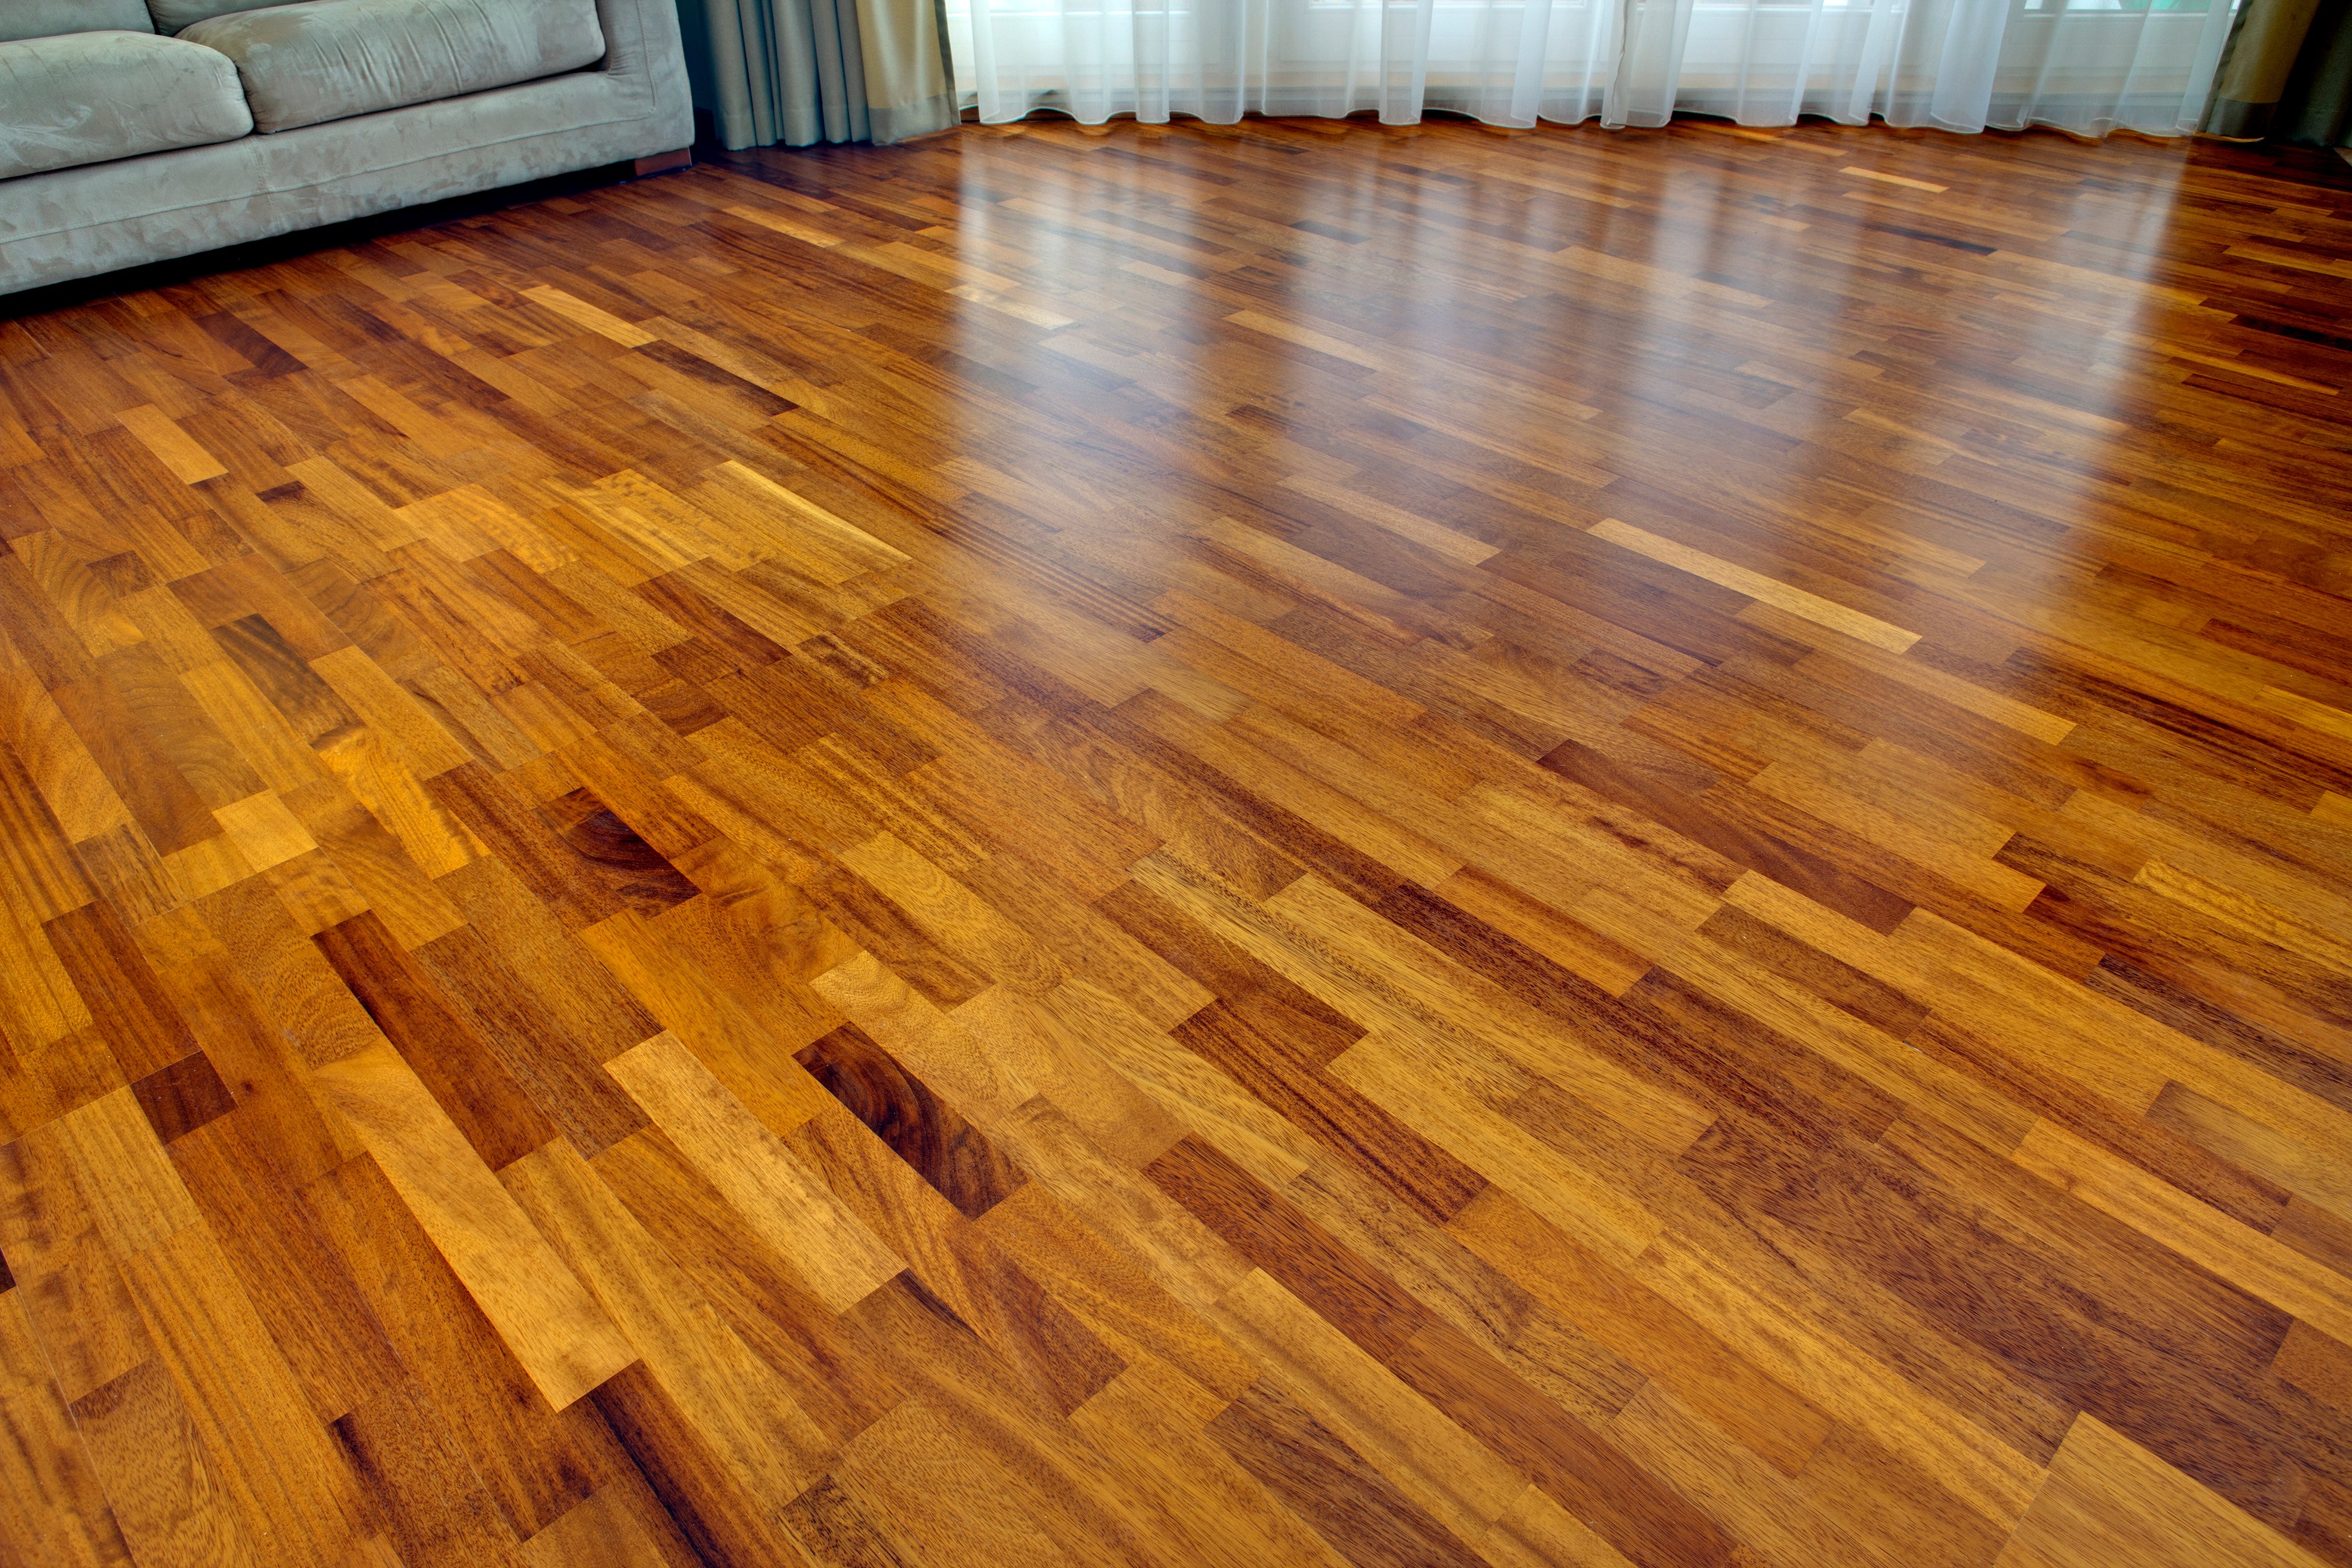 How To Install Hardwood Floors With, Can You Install Engineered Hardwood Over Radiant Heat